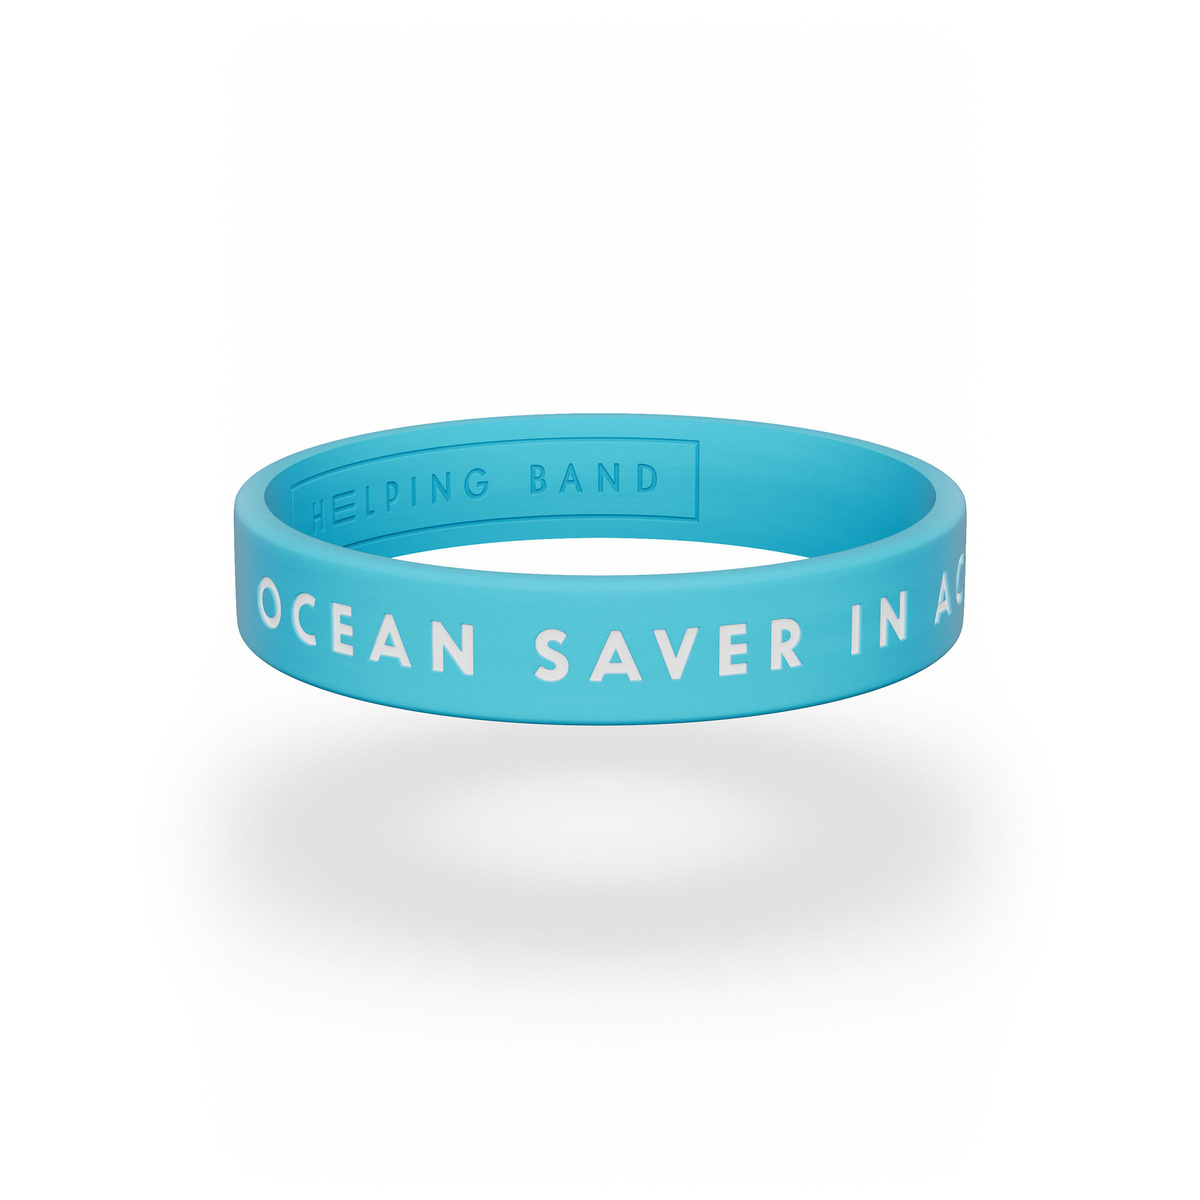 Helping Band Ocean Saver in Action Armband